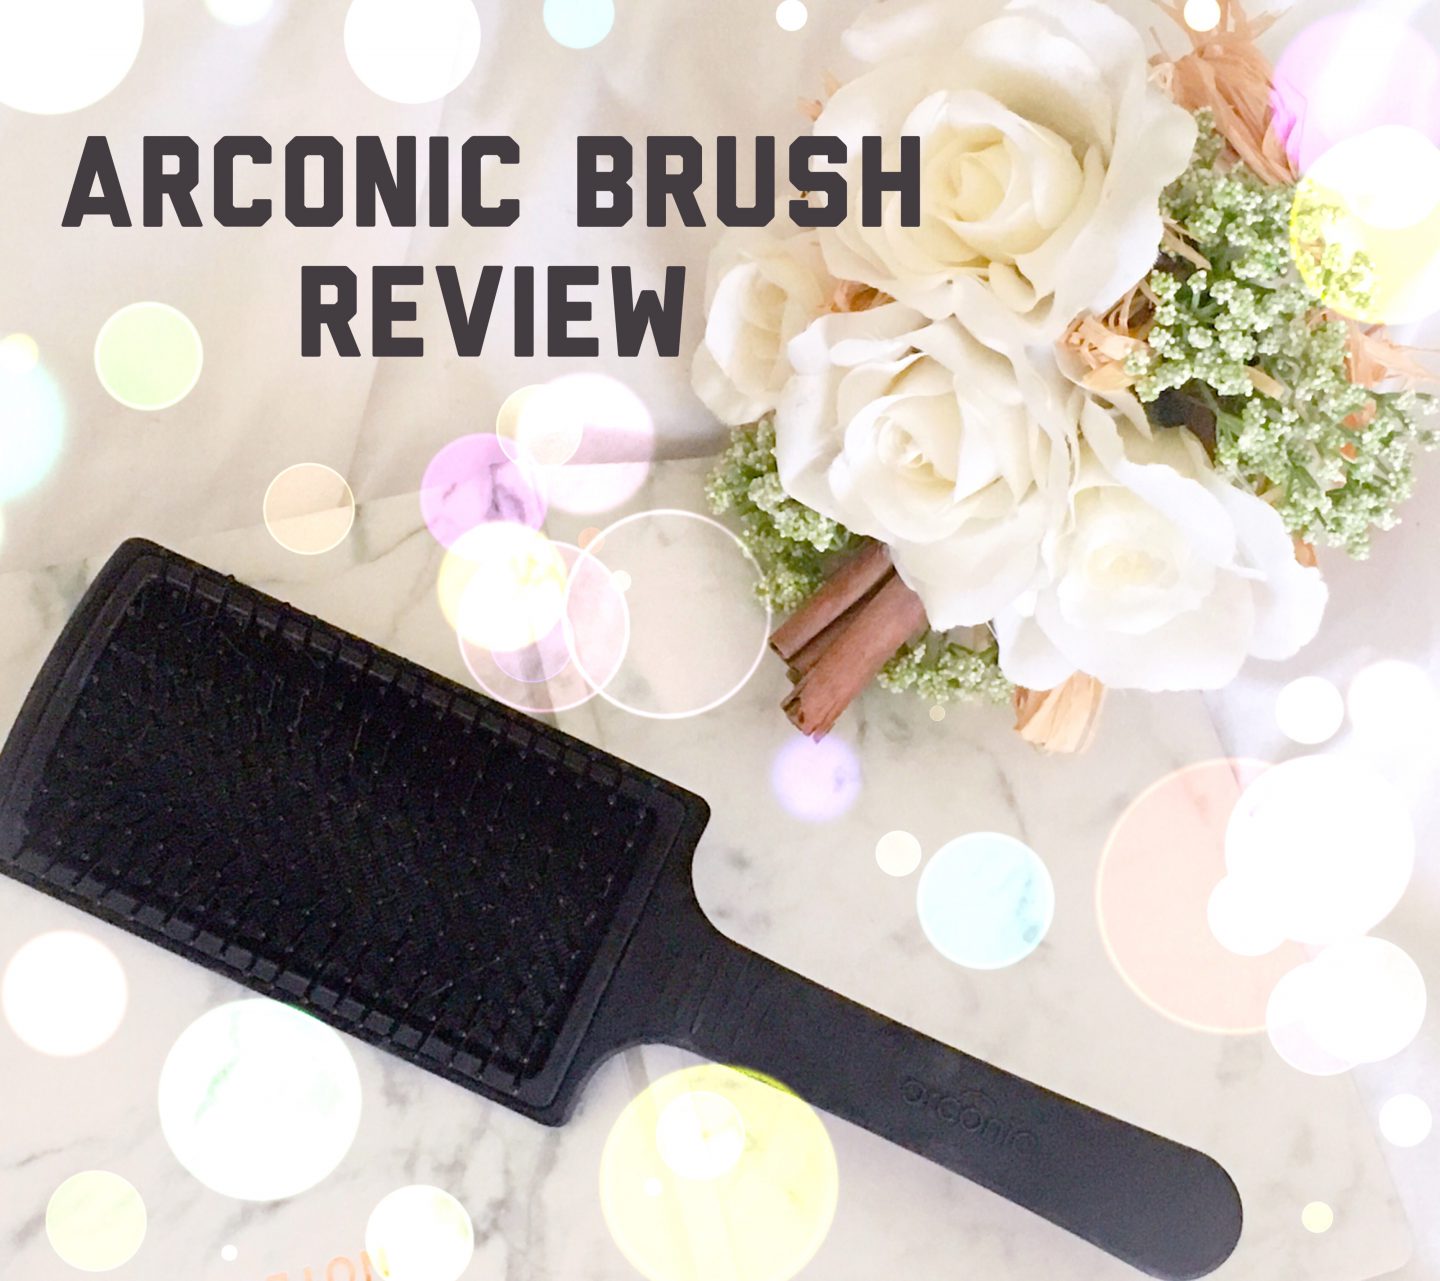 Arconic Brush Review